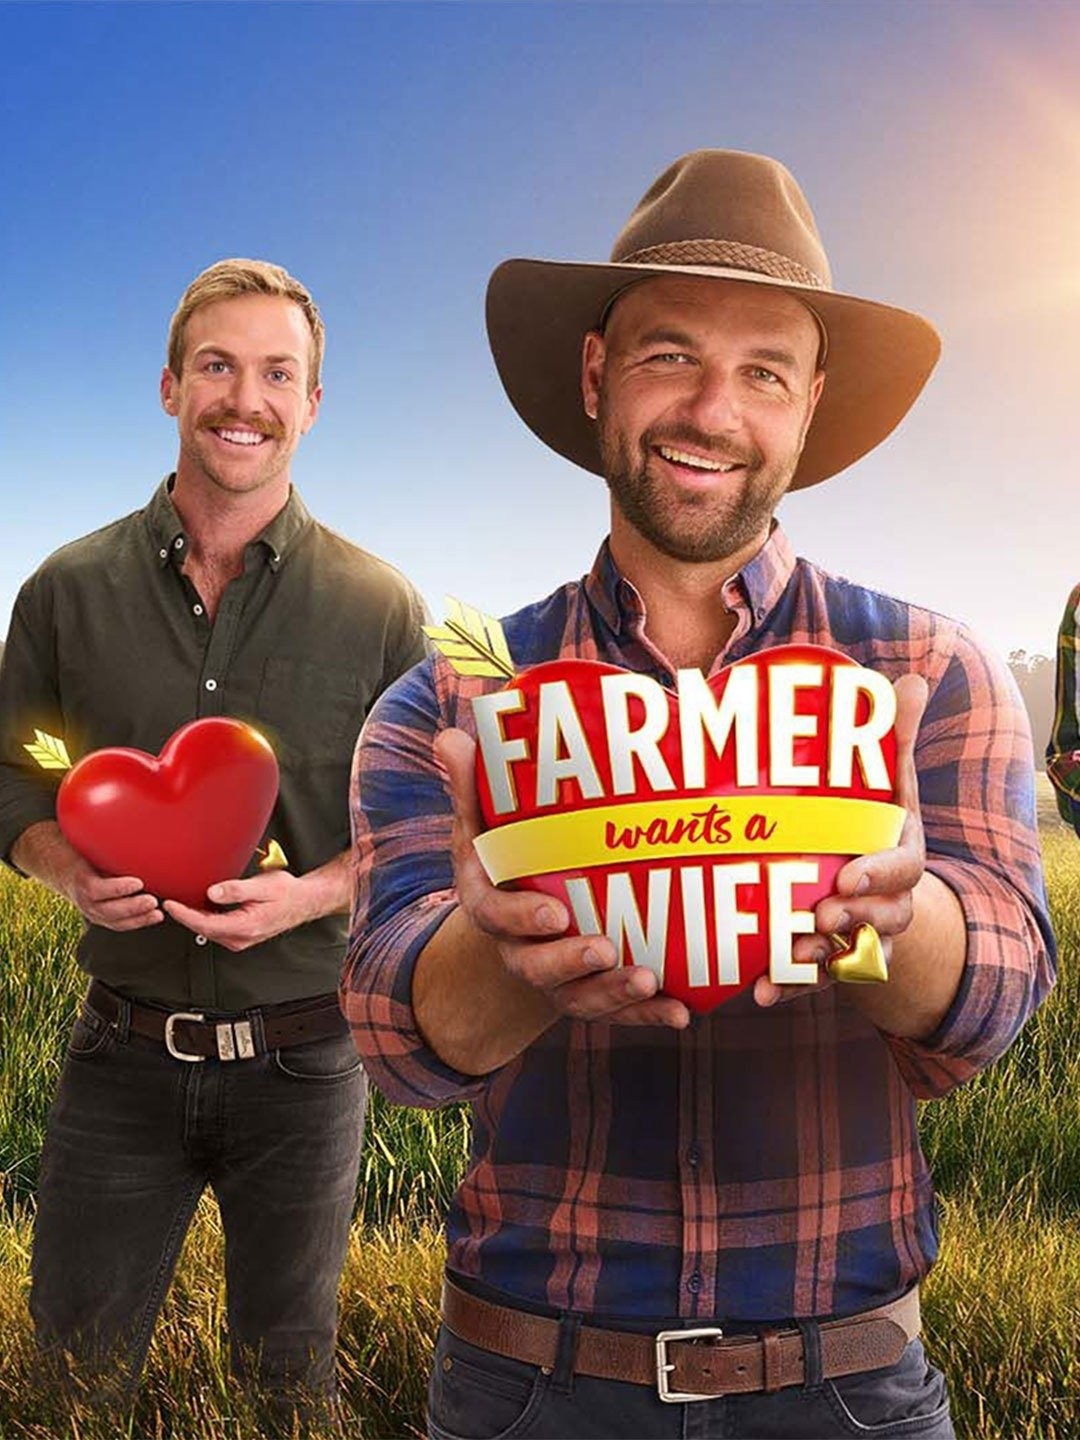 Lonely farmer seeks country girl, News